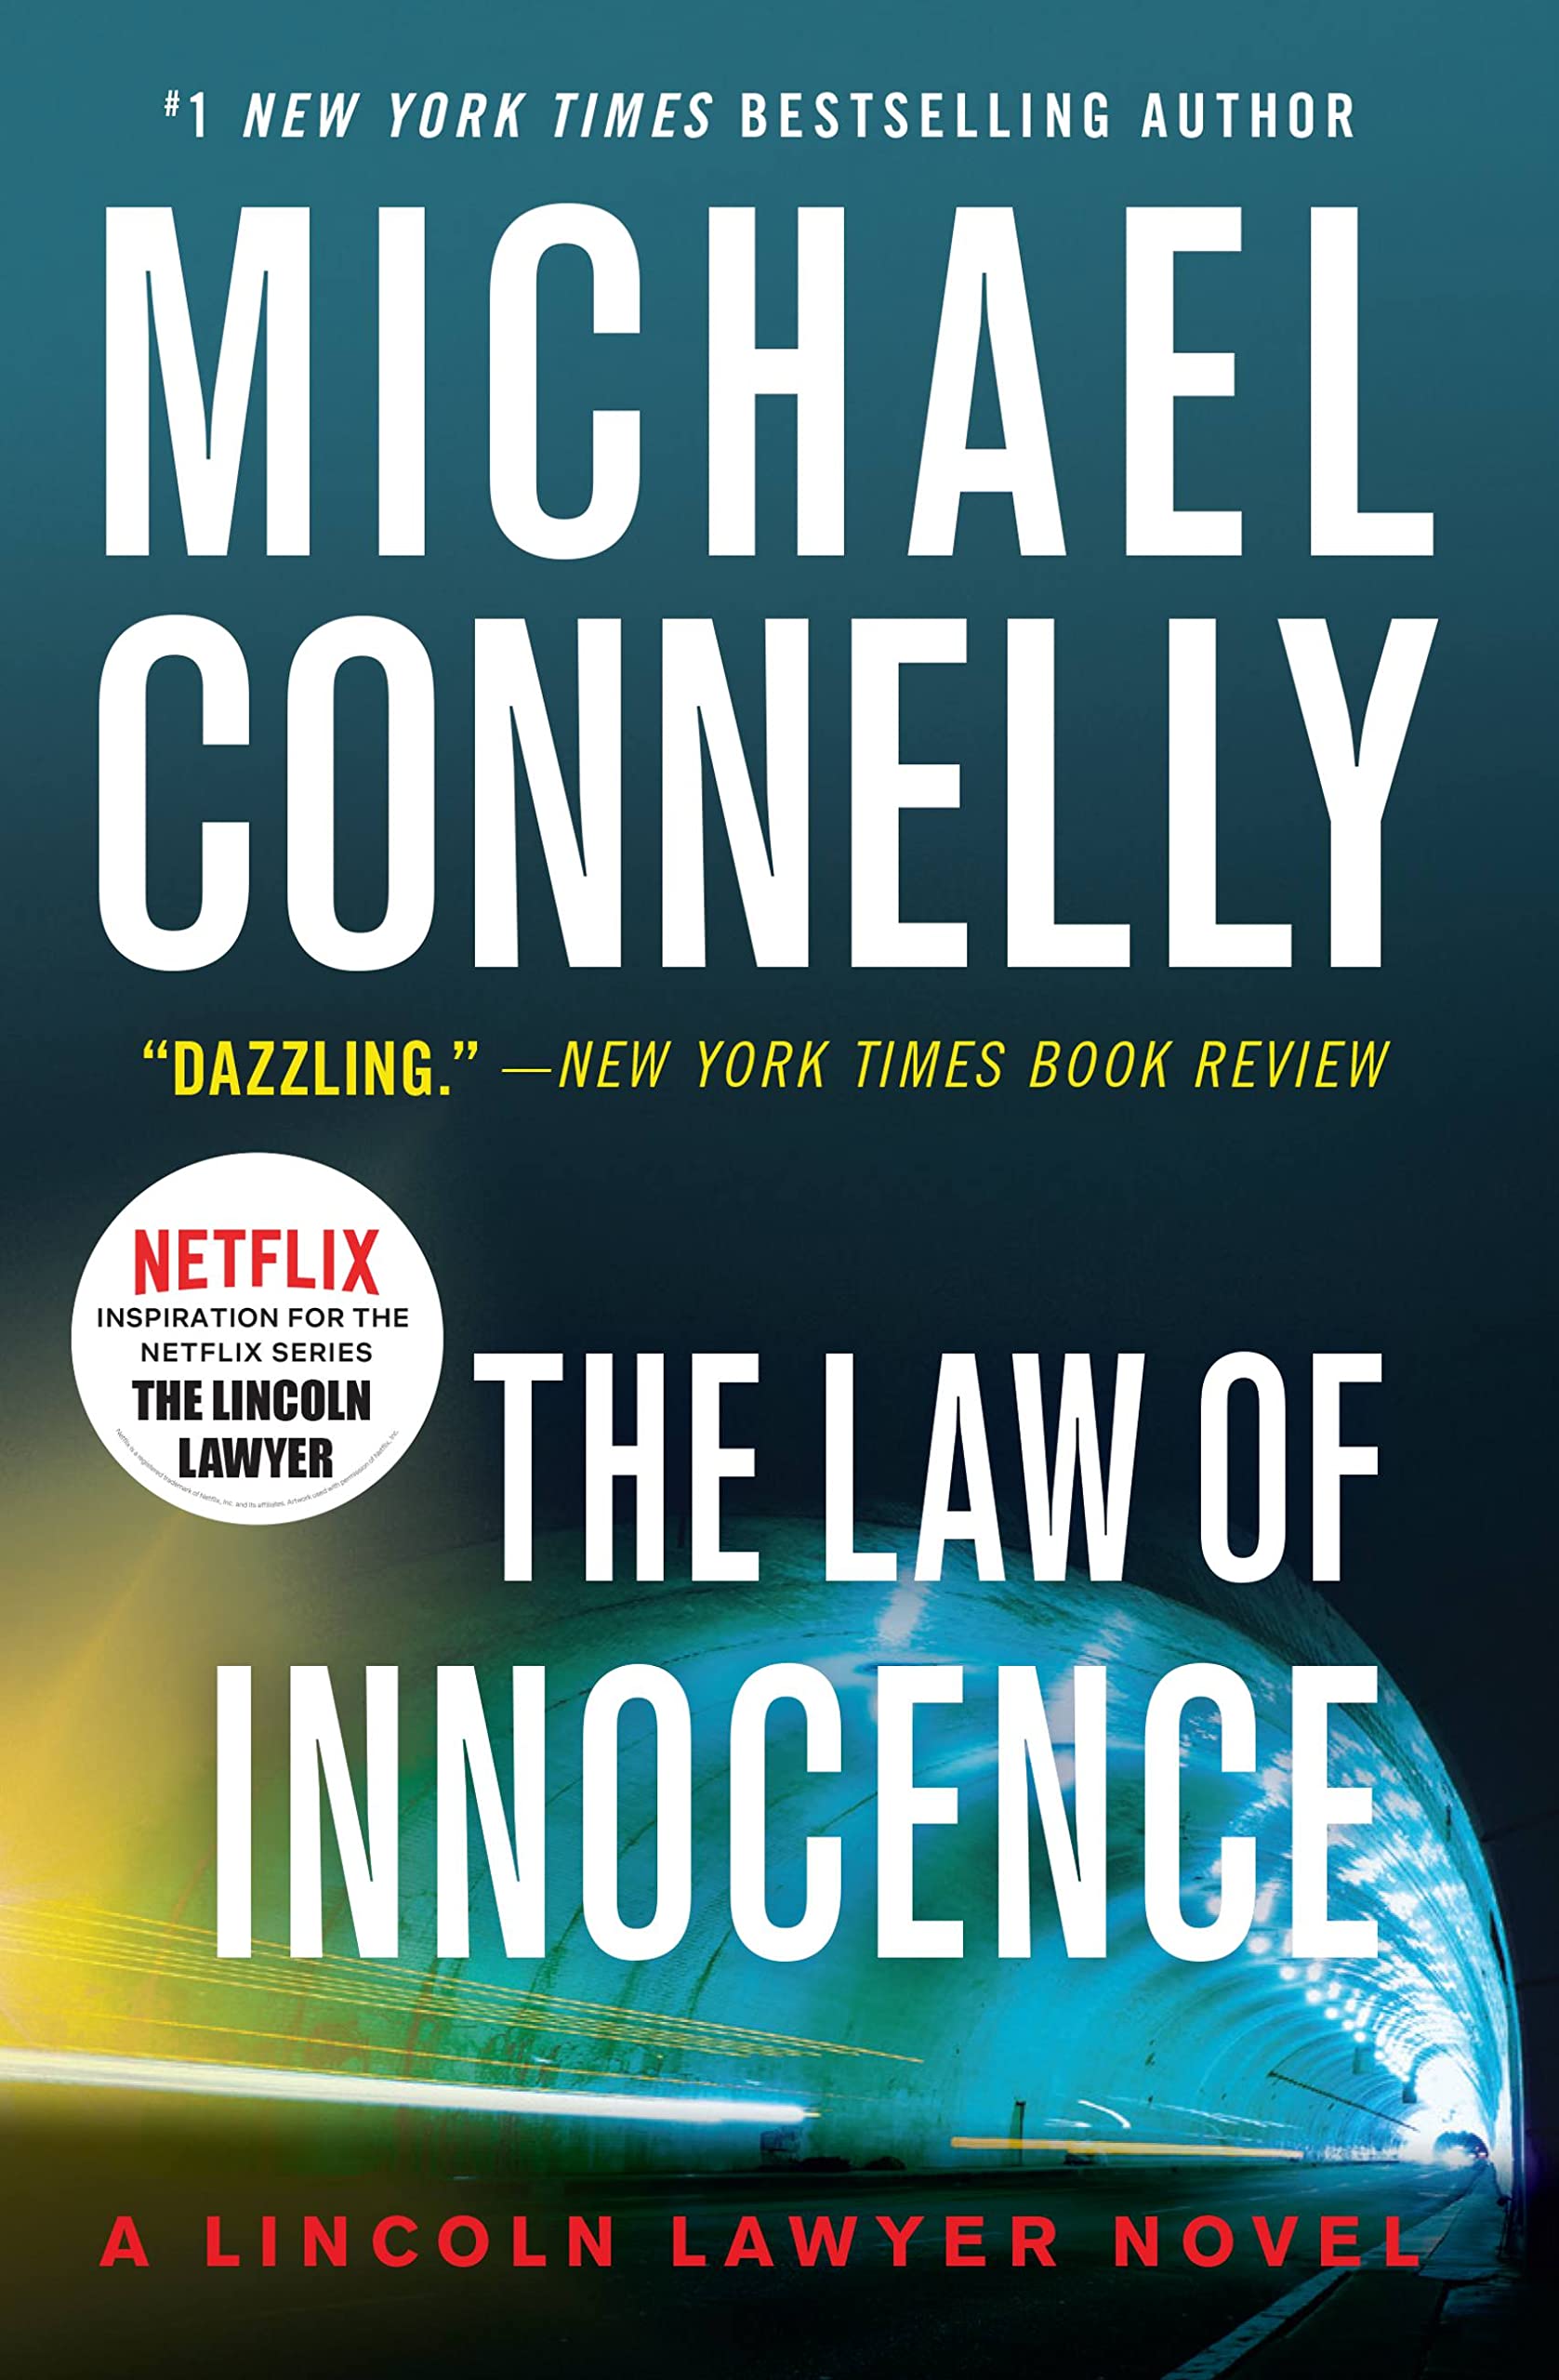 The Law of Innocence (A Lincoln Lawyer Novel #6) (Paperback)